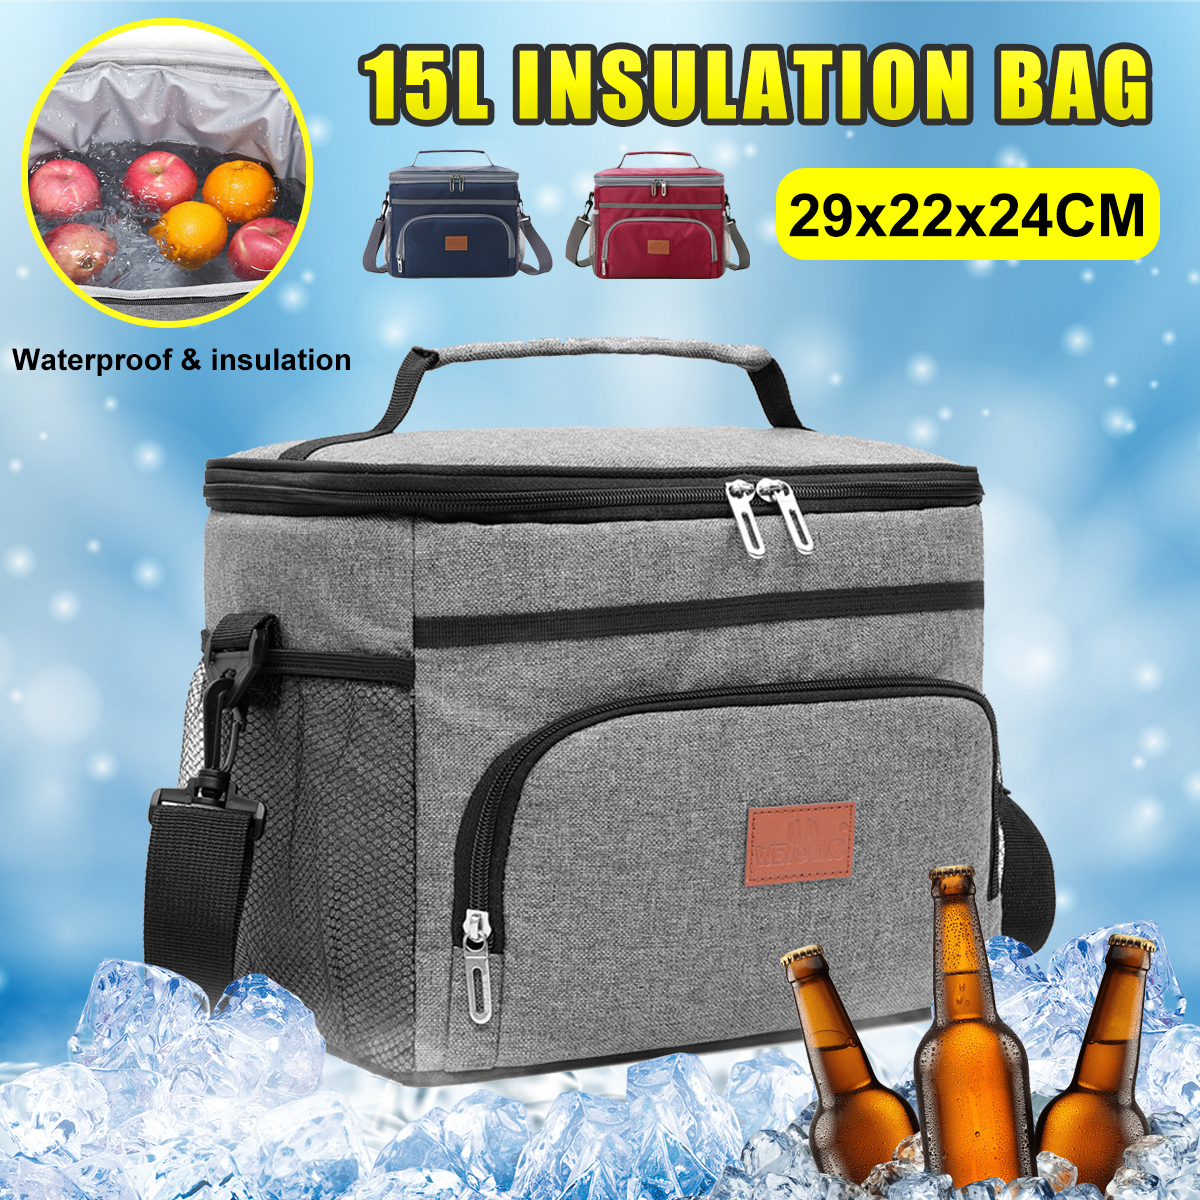 15L-Insulated-Picnic-Bag-Thermal-Food-Container-Handbag-Lunch-Bag-Outdoor-Camping-Travel-1872430-1